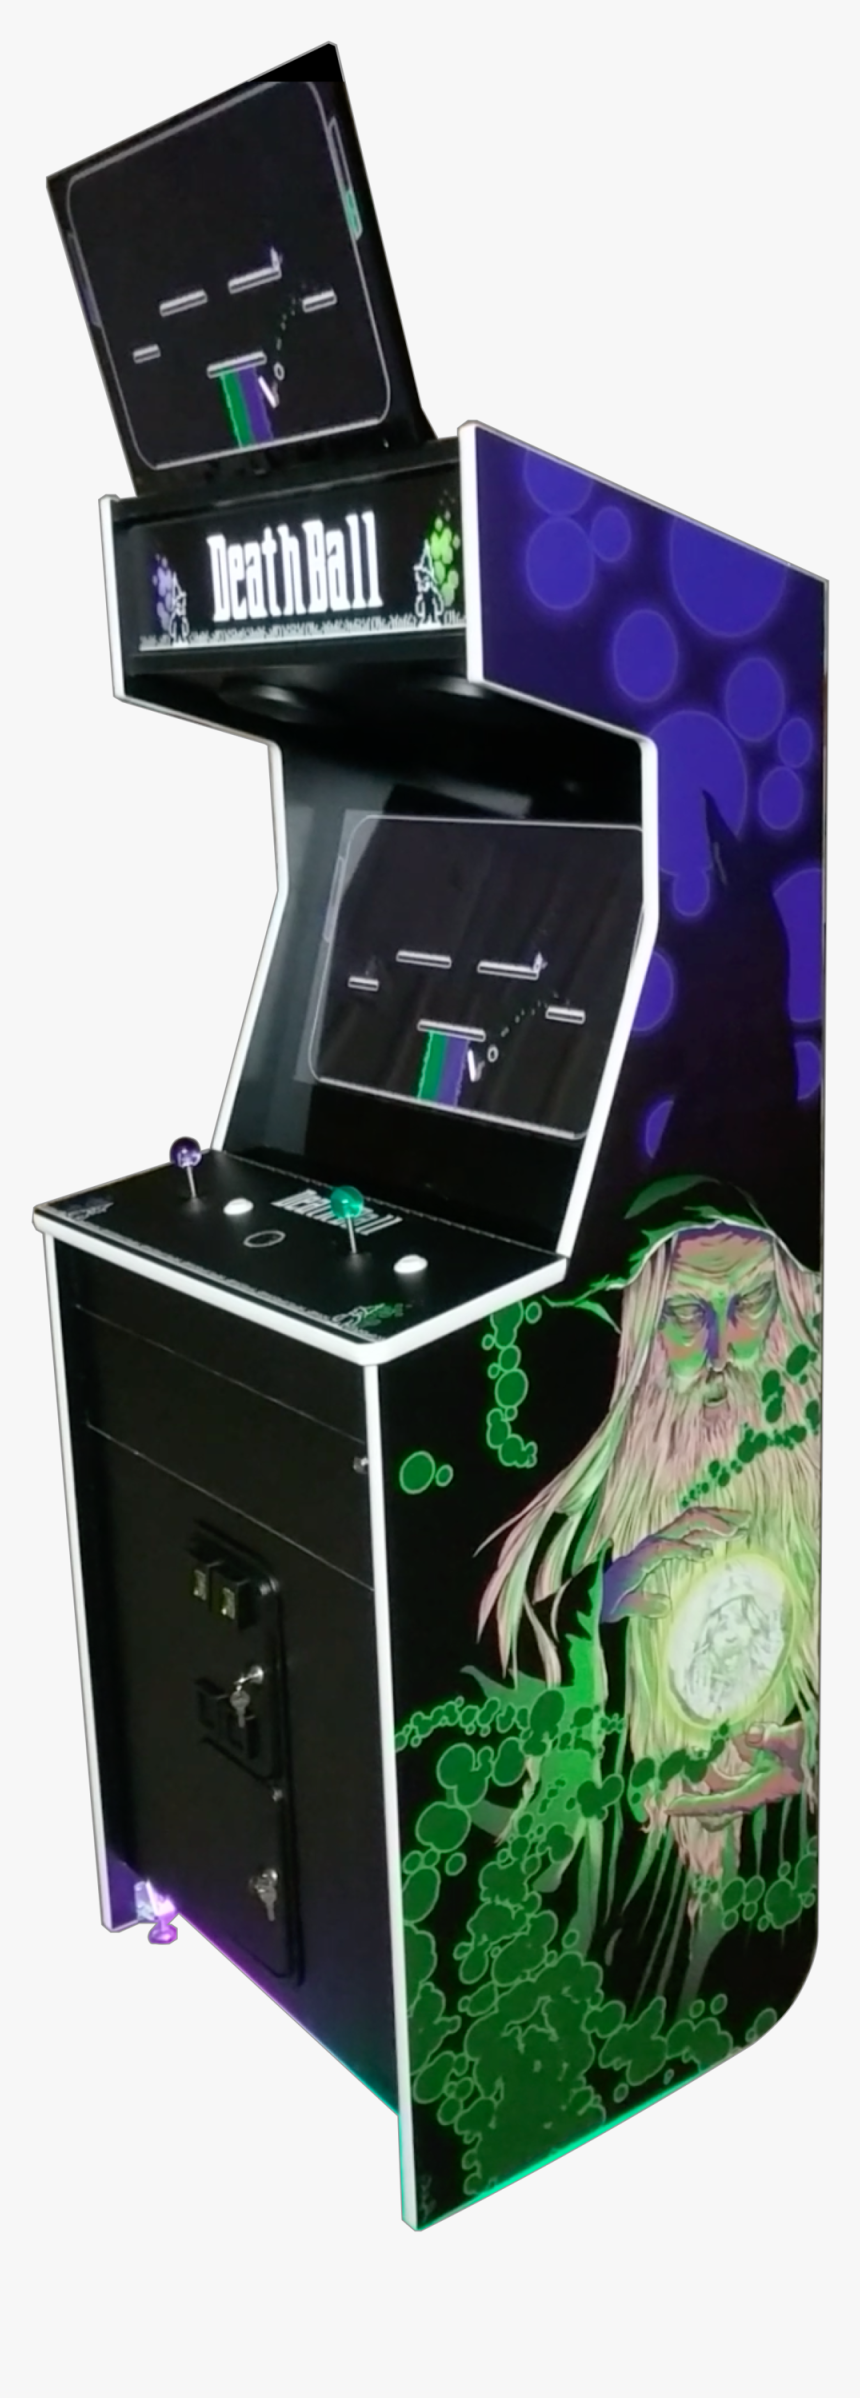 Deathballmk3-45 - Video Game Arcade Cabinet, HD Png Download, Free Download